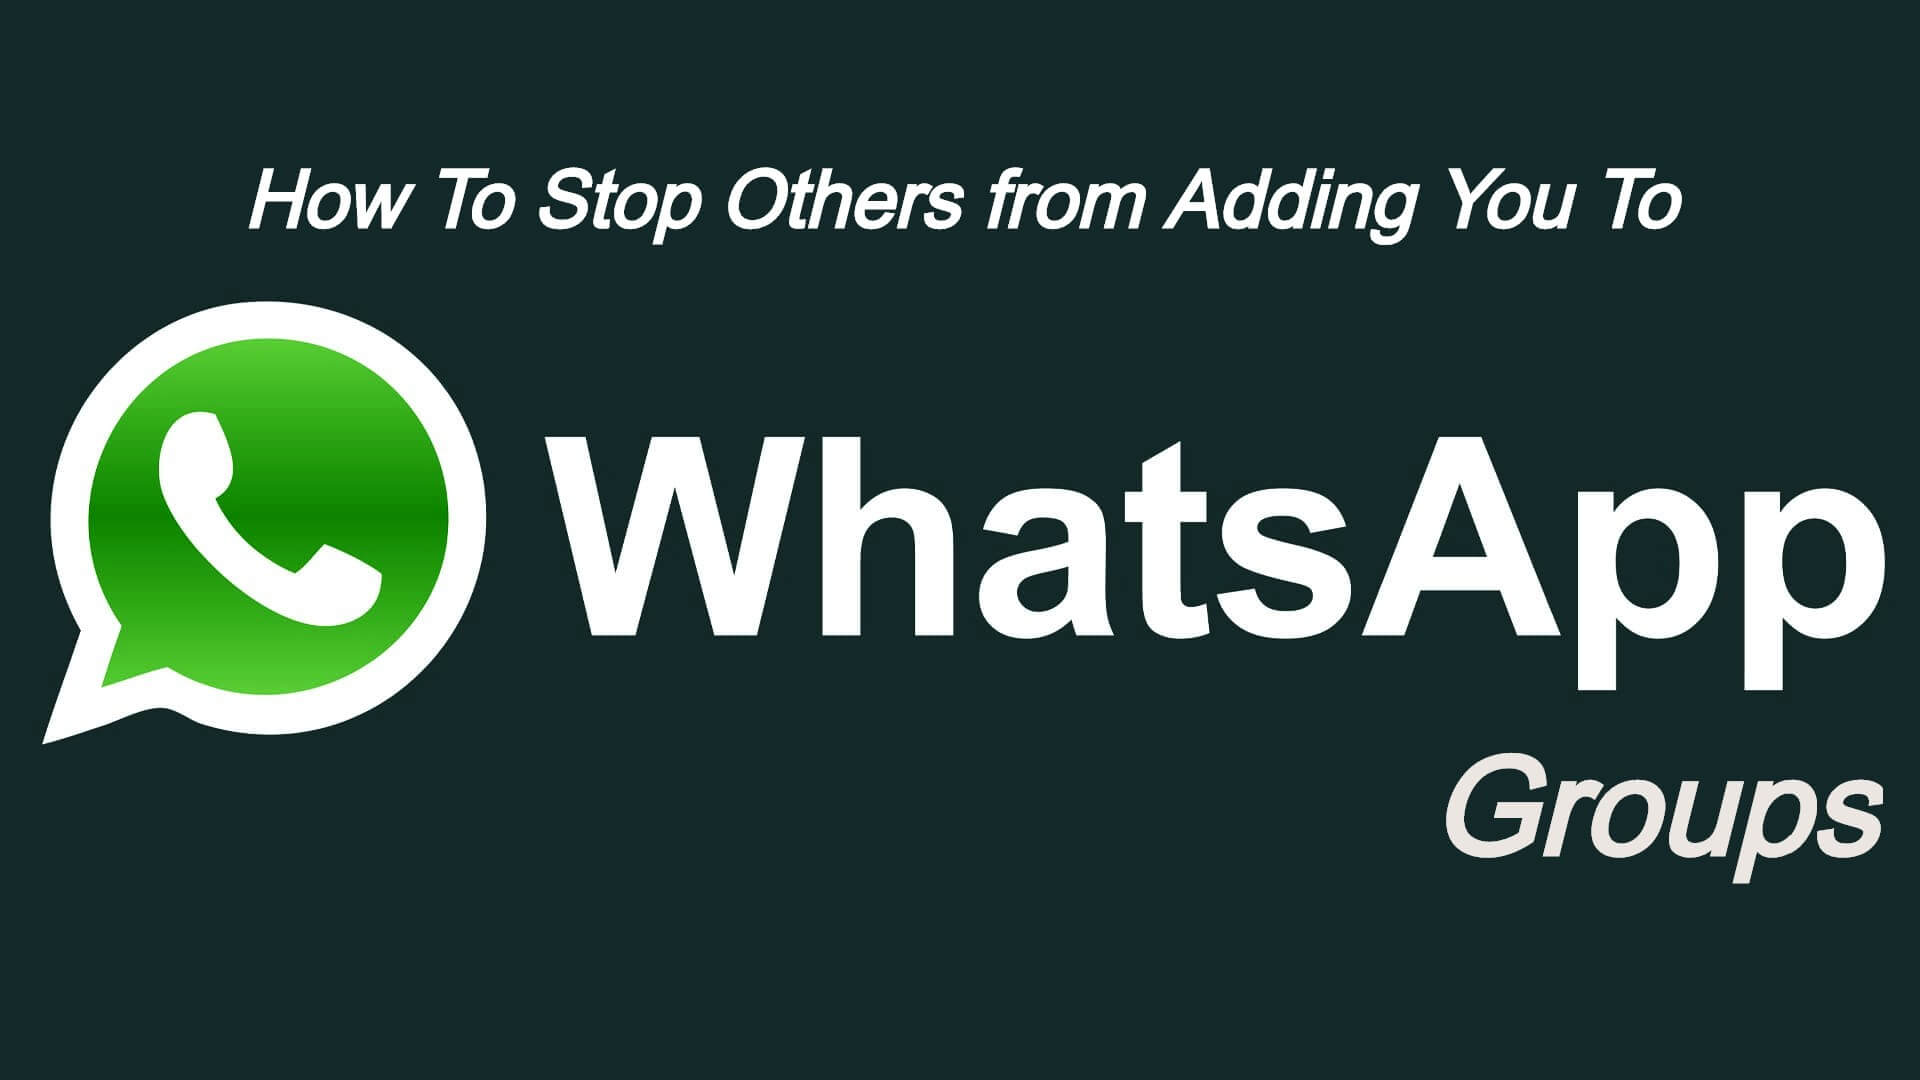 How To Stop Others From Adding You to WhatsApp Groups